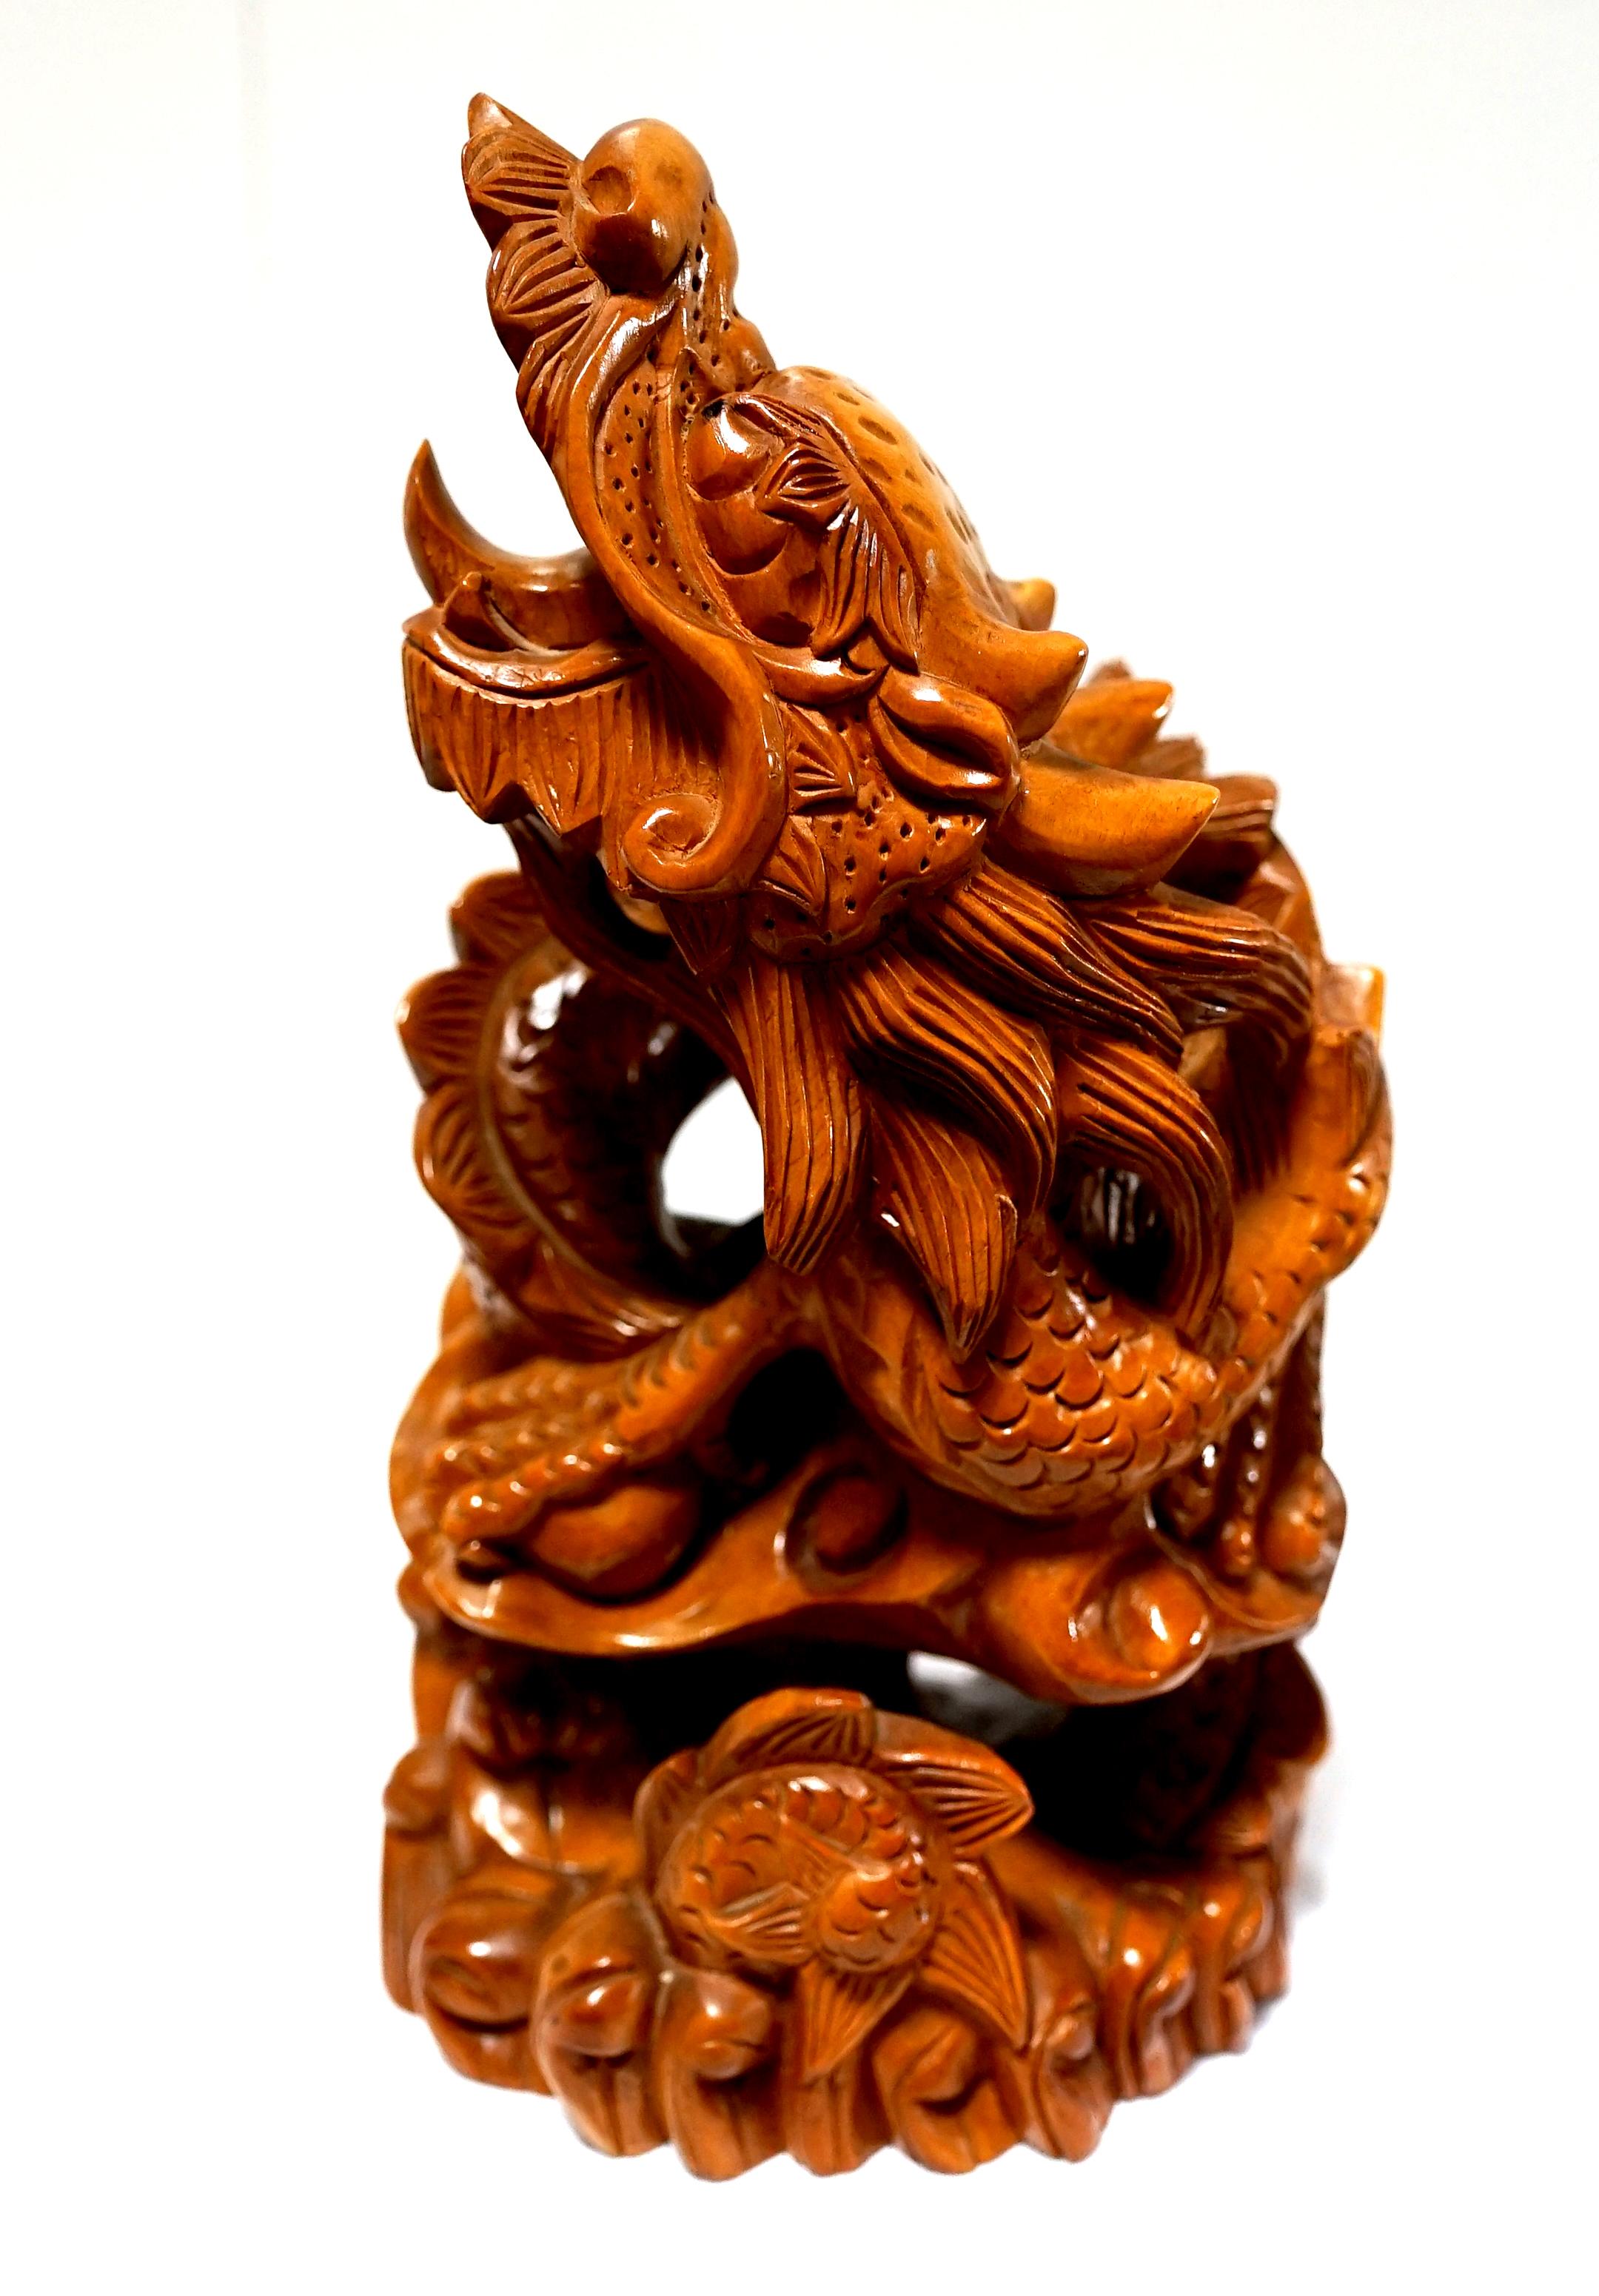 The year of the dragon shines an additional spotlight on this beautiful antique teakwood sculpture. The detail and the patina are amazing. The hand carved dragon takes on a lifelike quality in its coiled position, as though it is ready to unfurl.